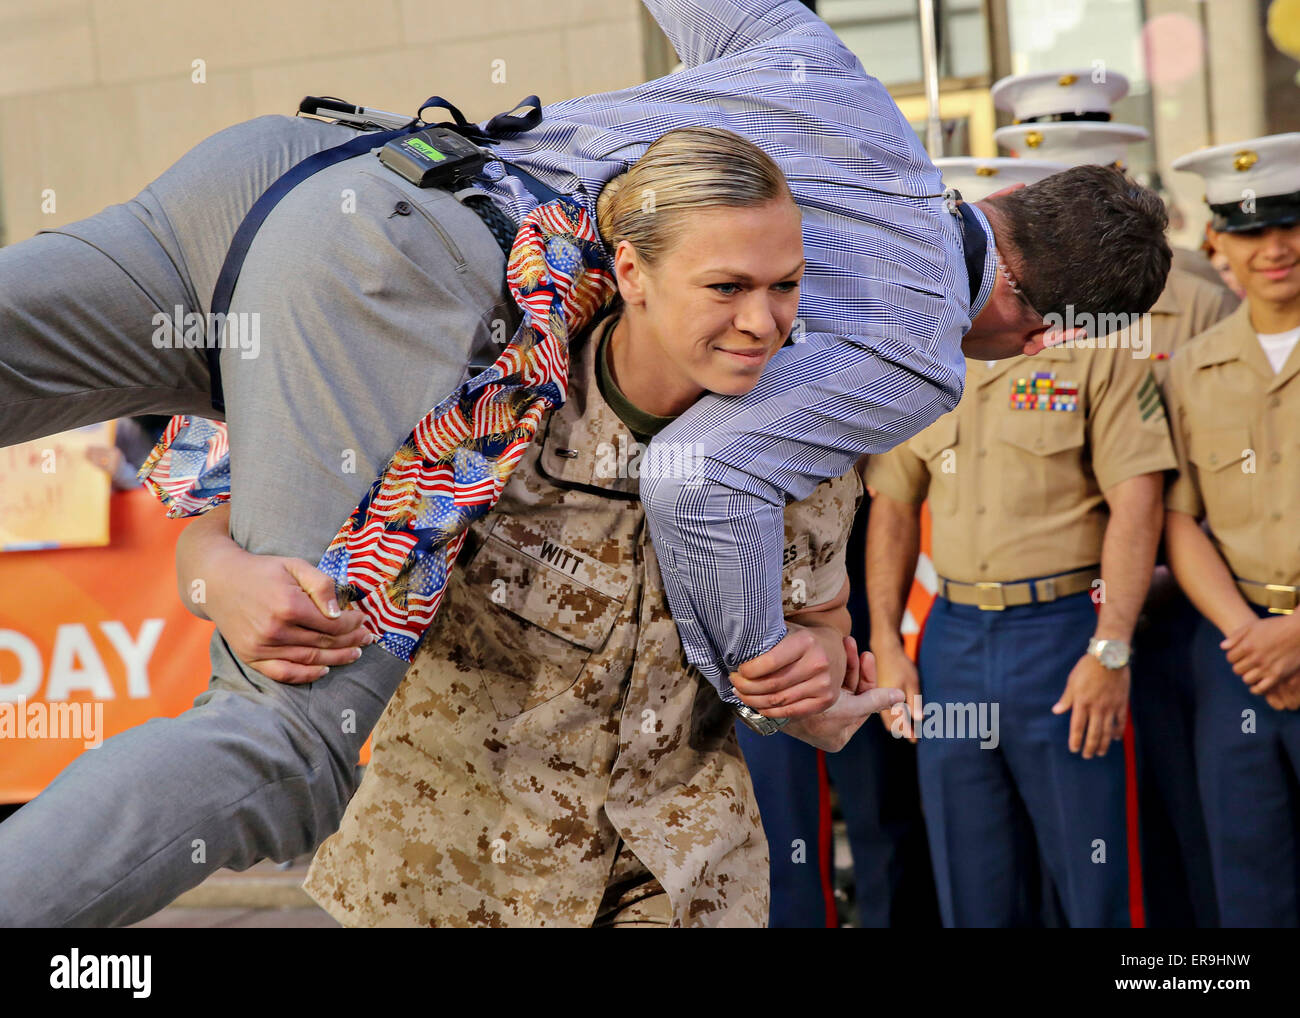 US Marine 1st Lt. Monica Witt carries MSNBC news anchor Thomas Roberts during the morning talk show Today as a part of Fleet Week May 23, 2015 in New York City, NY.  Marines showcase the capabilities of the Marine Corps both physically, mentally and technologically during Fleet Week New York. Stock Photo